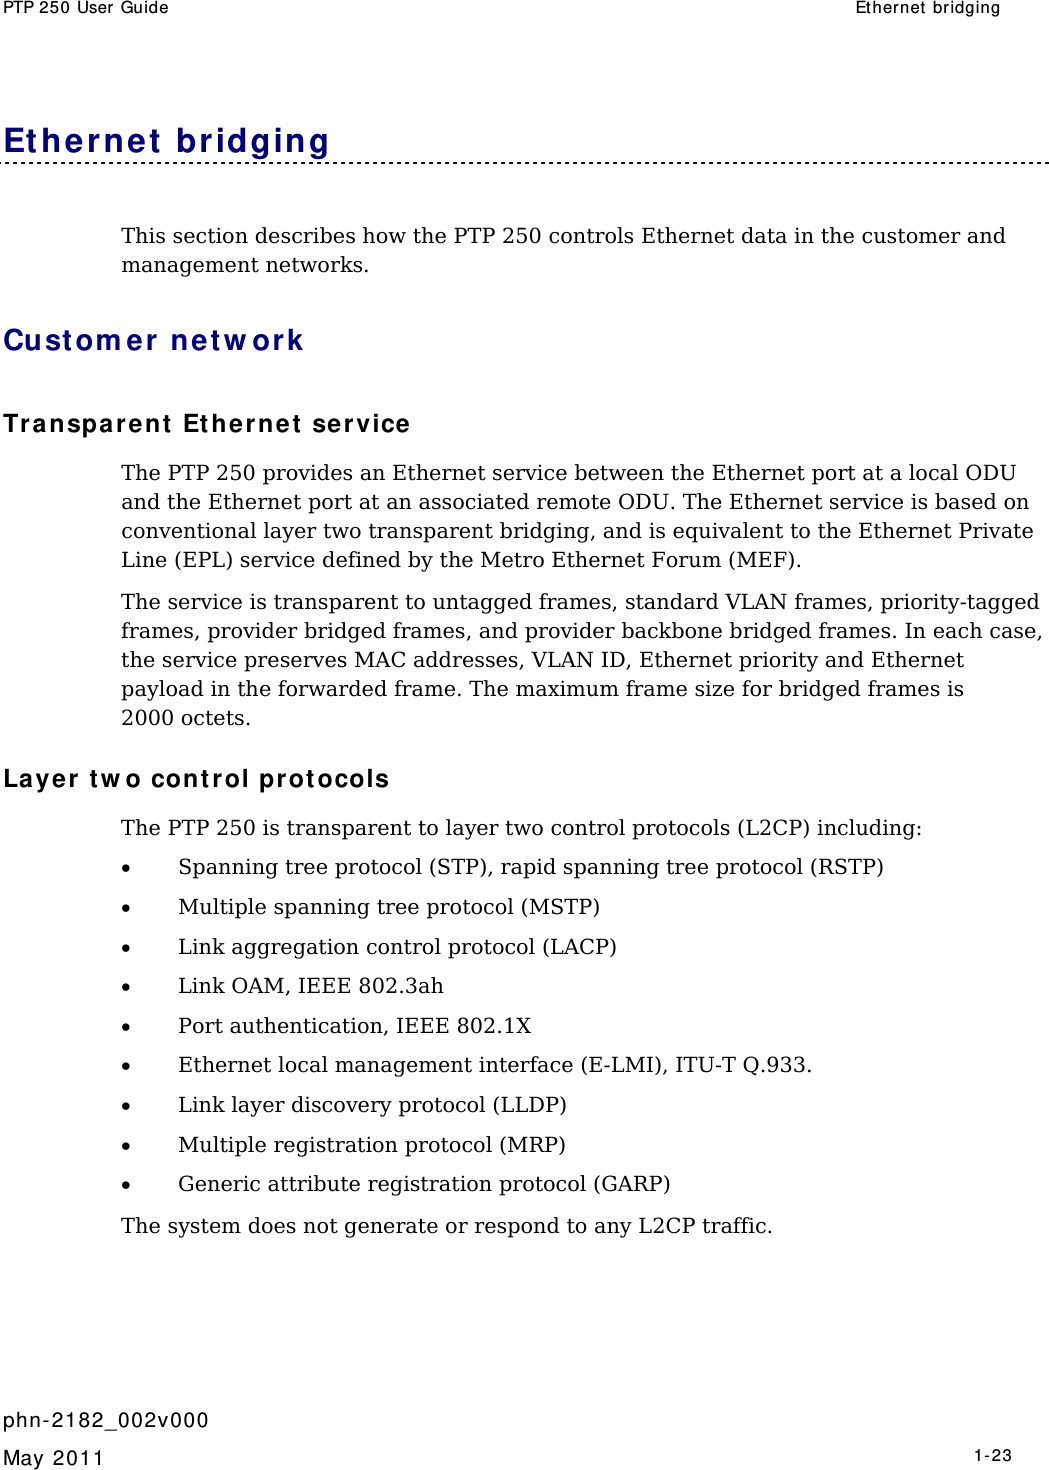 PTP 250 User Guide  Ether net  bridging   phn- 2182_002v000   May 2011   1-23  Et hernet  bridging This section describes how the PTP 250 controls Ethernet data in the customer and management networks. Cust om er ne t w ork Tr a nspare nt  Et hernet  service  The PTP 250 provides an Ethernet service between the Ethernet port at a local ODU and the Ethernet port at an associated remote ODU. The Ethernet service is based on conventional layer two transparent bridging, and is equivalent to the Ethernet Private Line (EPL) service defined by the Metro Ethernet Forum (MEF). The service is transparent to untagged frames, standard VLAN frames, priority-tagged frames, provider bridged frames, and provider backbone bridged frames. In each case, the service preserves MAC addresses, VLAN ID, Ethernet priority and Ethernet payload in the forwarded frame. The maximum frame size for bridged frames is 2000 octets. Layer t w o cont rol pr ot ocols The PTP 250 is transparent to layer two control protocols (L2CP) including: • Spanning tree protocol (STP), rapid spanning tree protocol (RSTP) • Multiple spanning tree protocol (MSTP) • Link aggregation control protocol (LACP) • Link OAM, IEEE 802.3ah • Port authentication, IEEE 802.1X • Ethernet local management interface (E-LMI), ITU-T Q.933. • Link layer discovery protocol (LLDP) • Multiple registration protocol (MRP) • Generic attribute registration protocol (GARP) The system does not generate or respond to any L2CP traffic.  